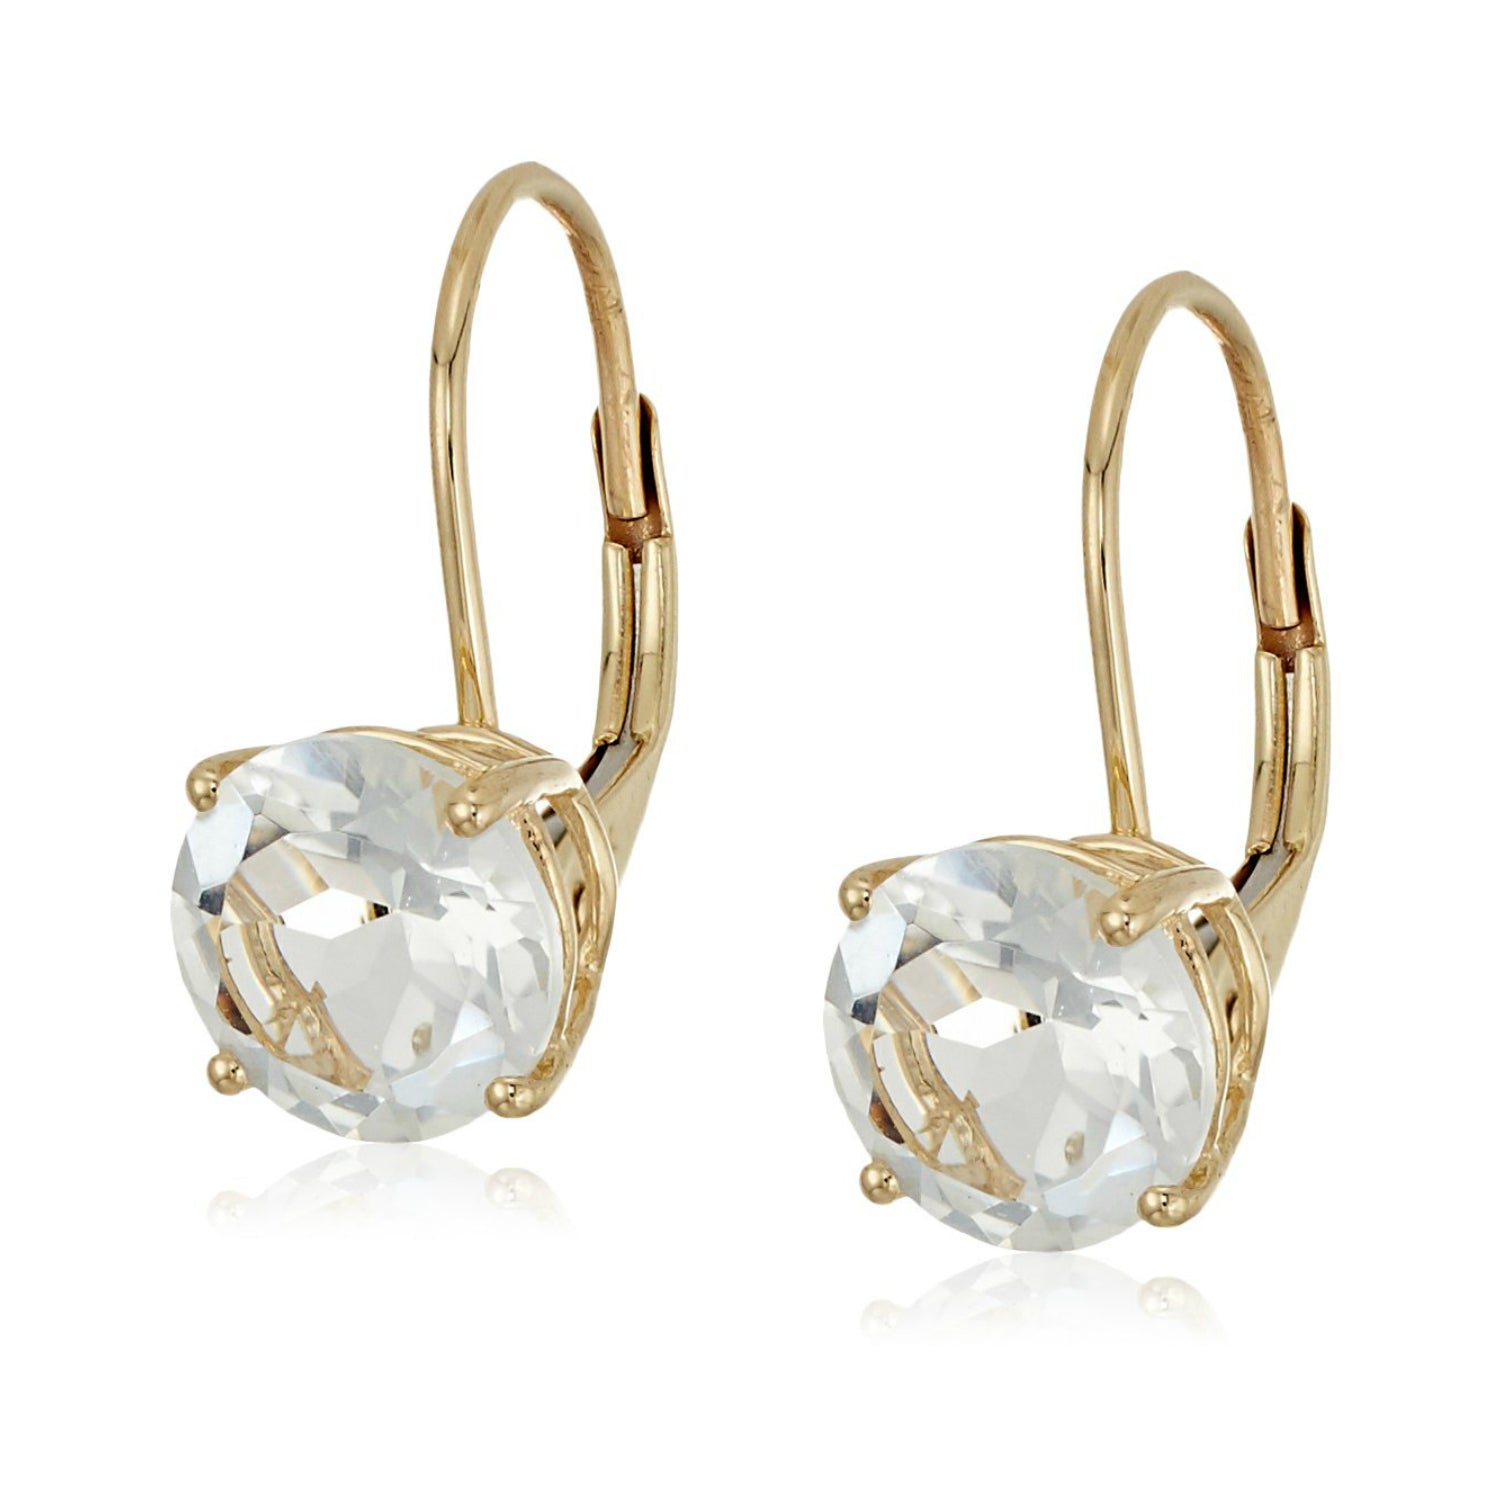 10k Yellow Gold White Topaz Round Lever Dangle Earrings - pinctore